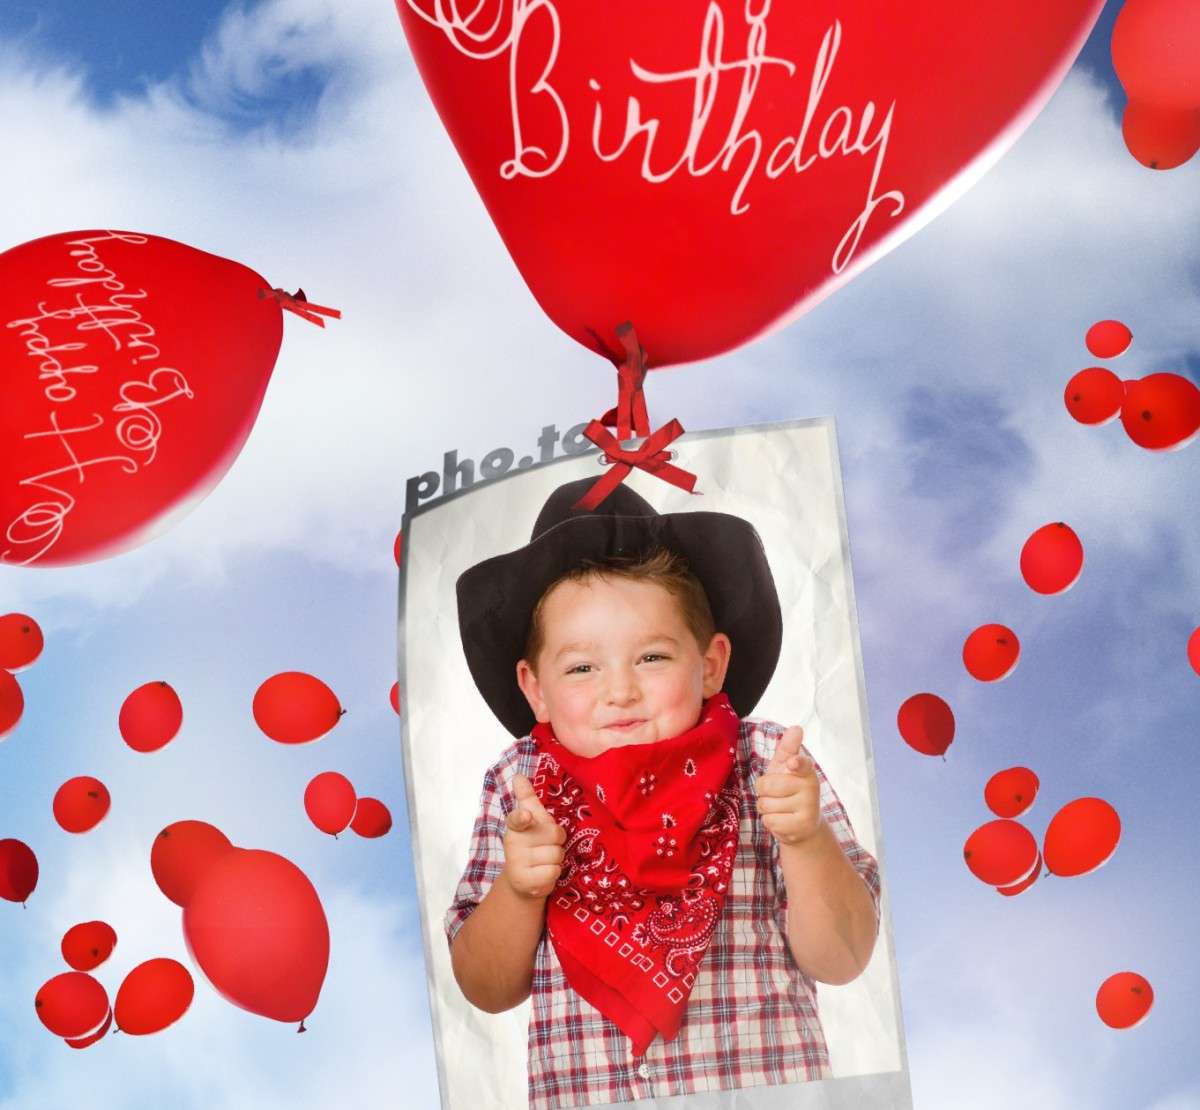 Birthday card with flying balloons! Printable photo template